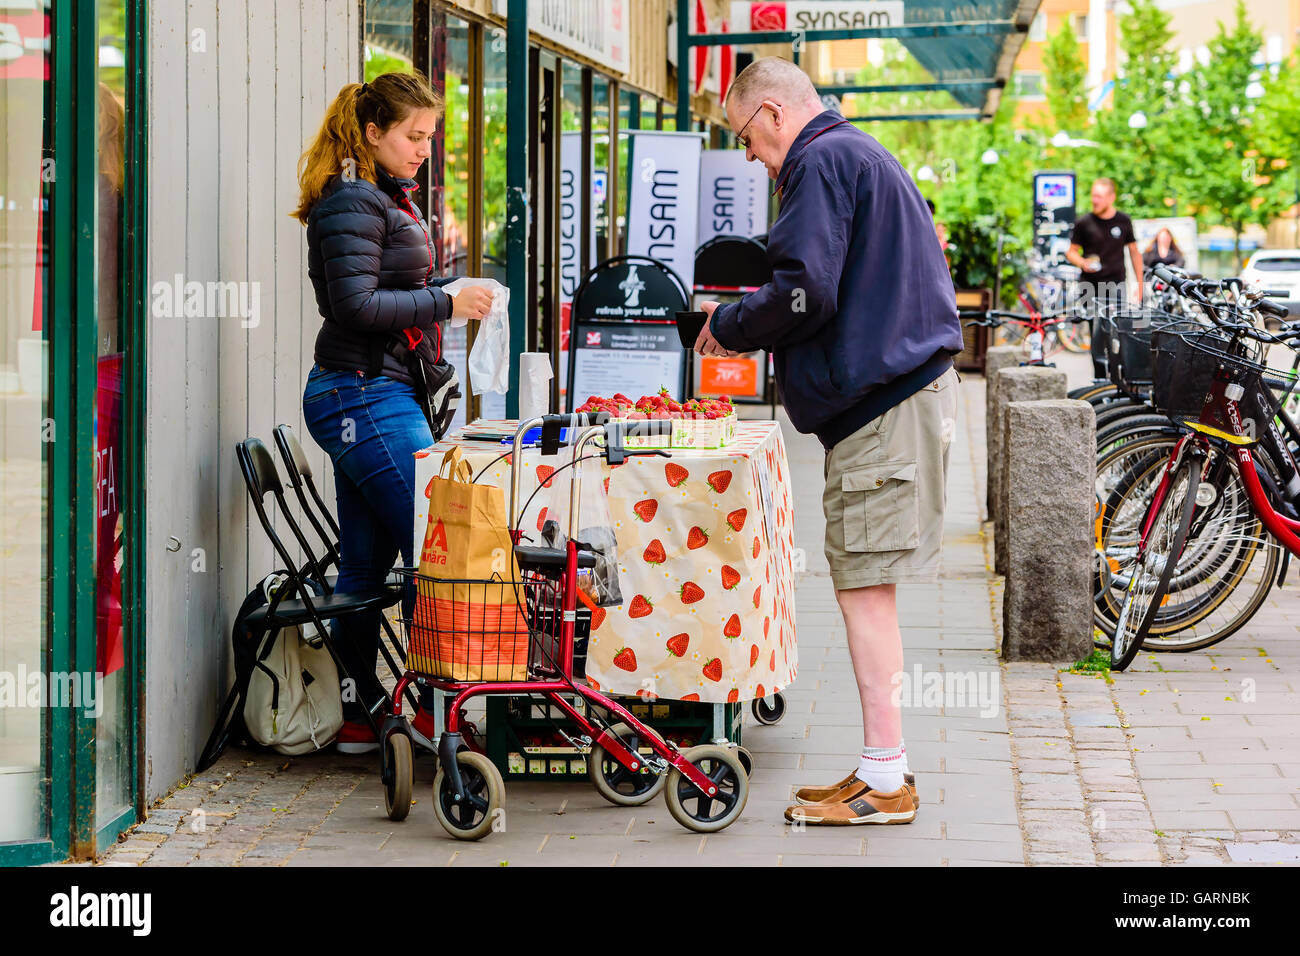 Motala, Sweden - June 21, 2016: Woman vending strawberries to a man outside a shop. Man has a walker standing beside him and he Stock Photo